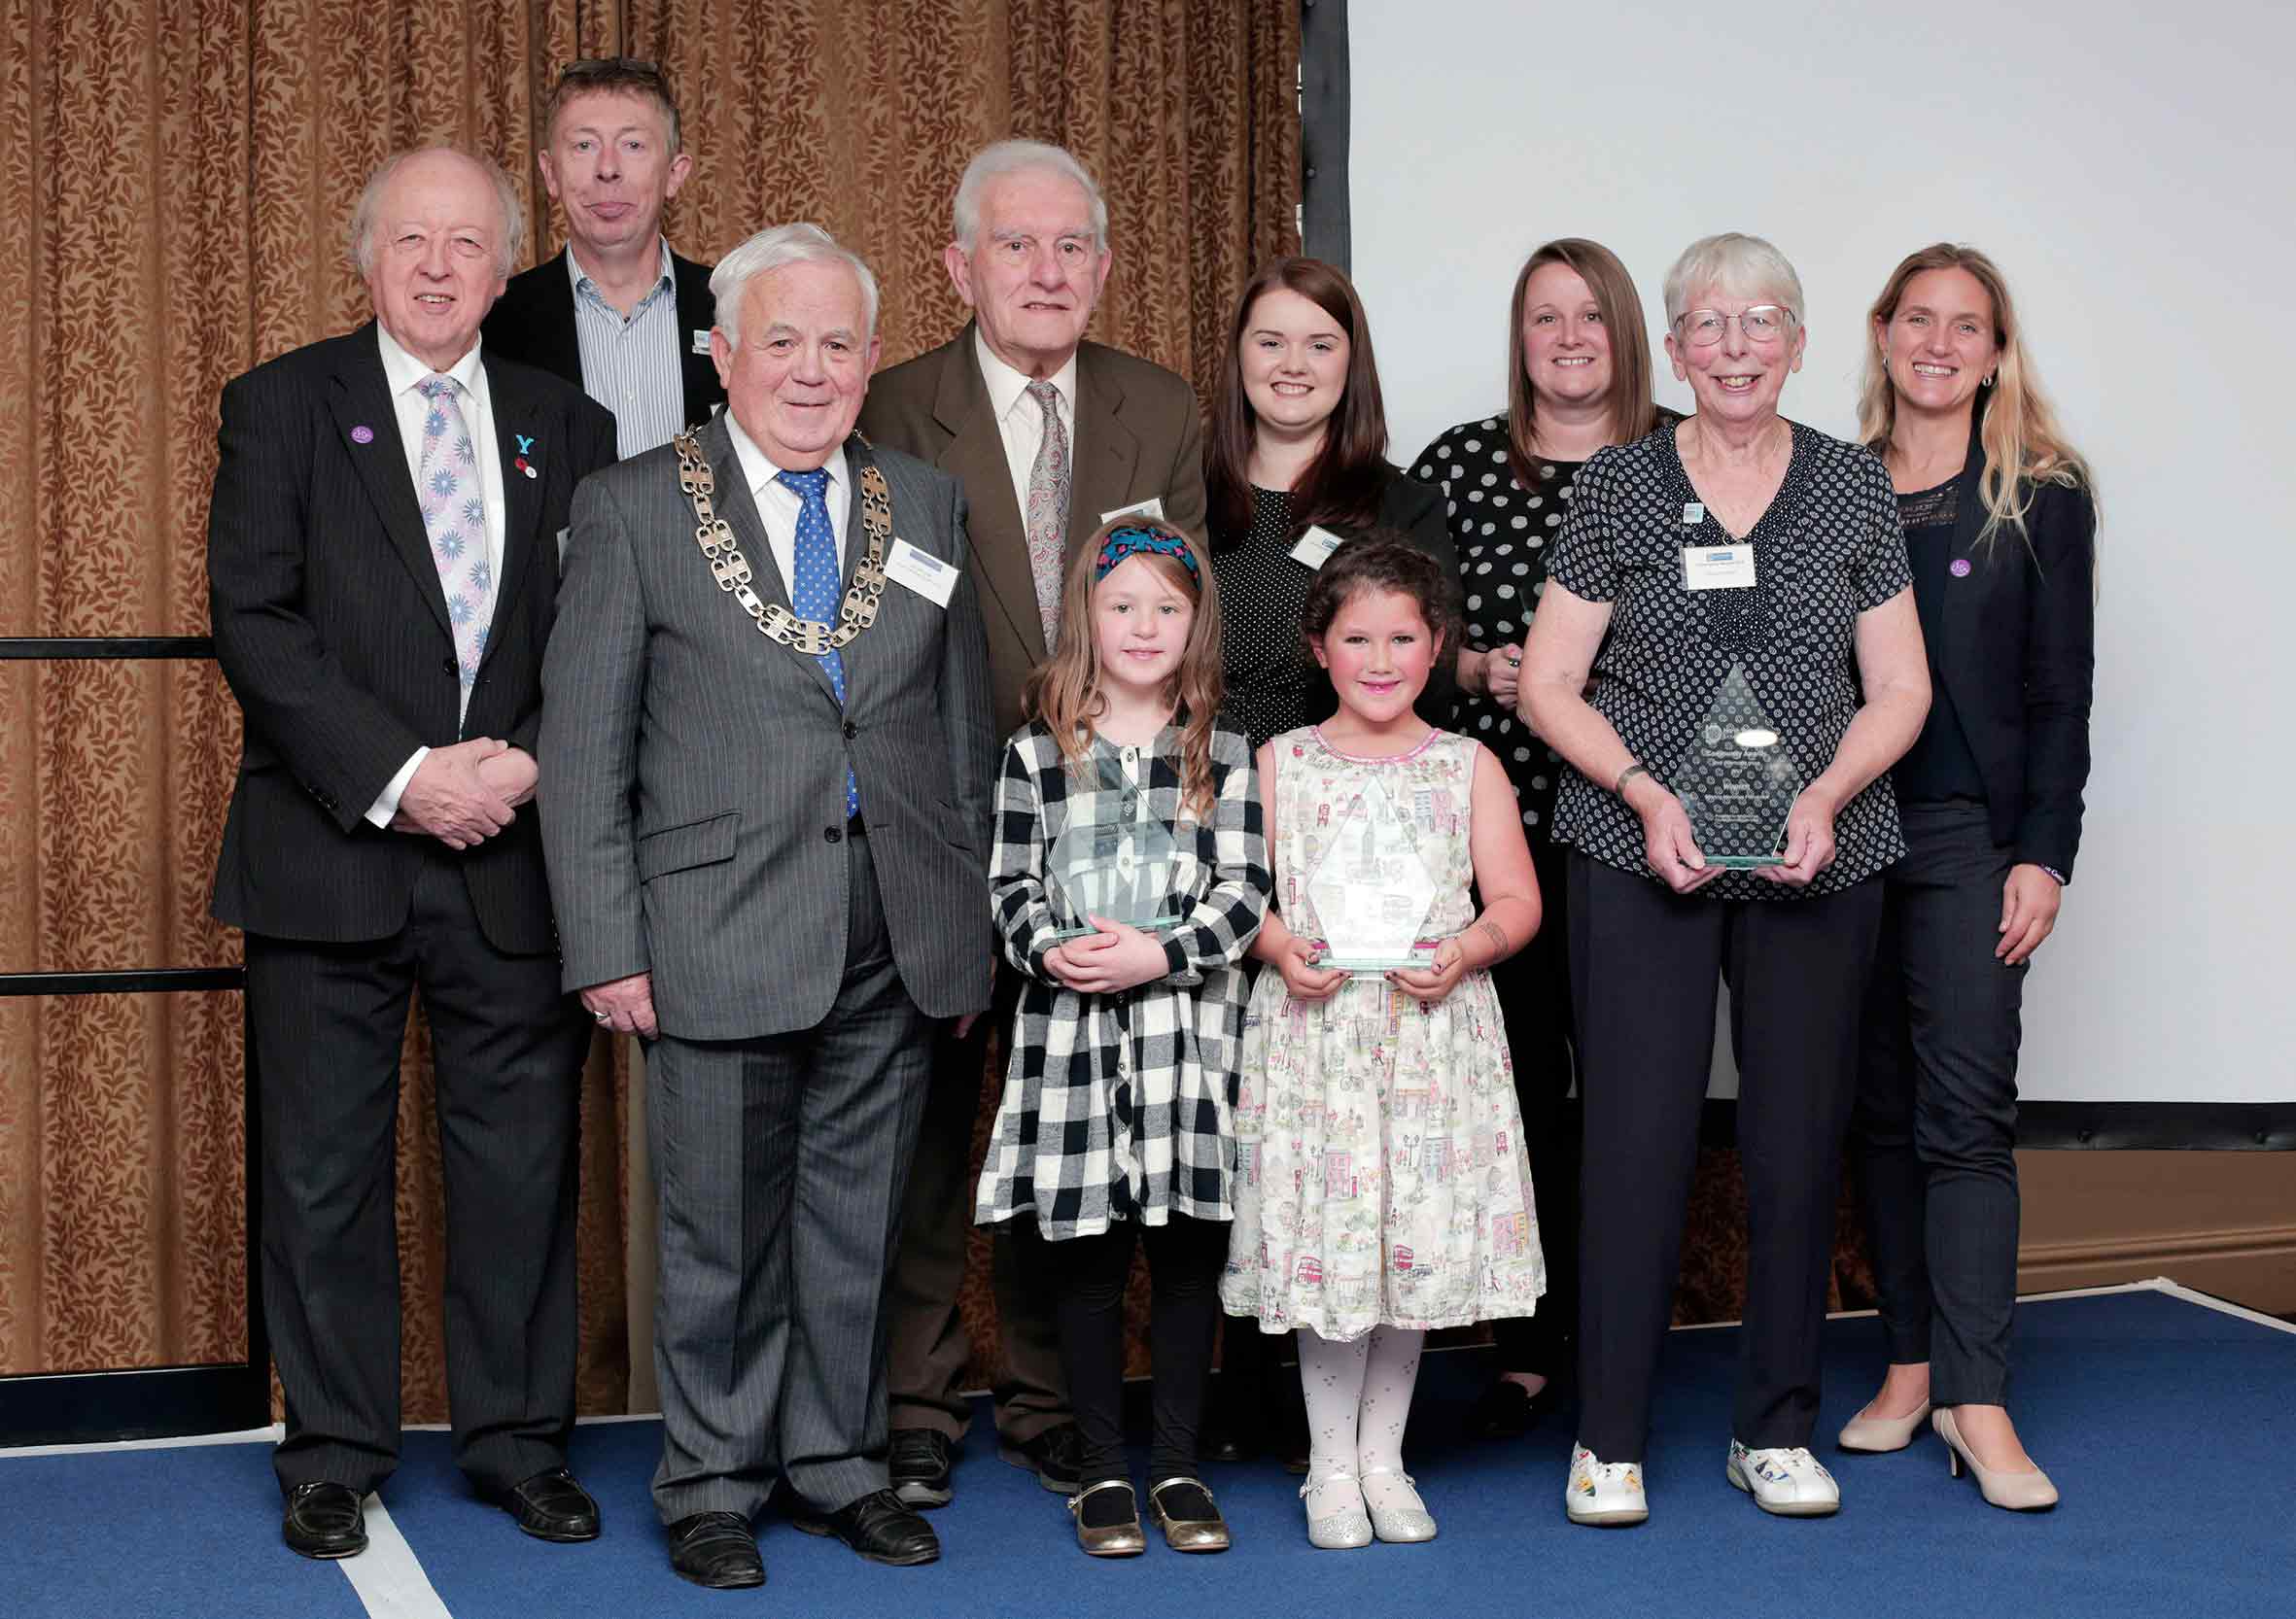 North Yorkshire’s Chairman, Cllr Jim Clark, with Council Leader Carl Les at the 2019 Community Awards ceremony, which celebrates the county’s volunteers